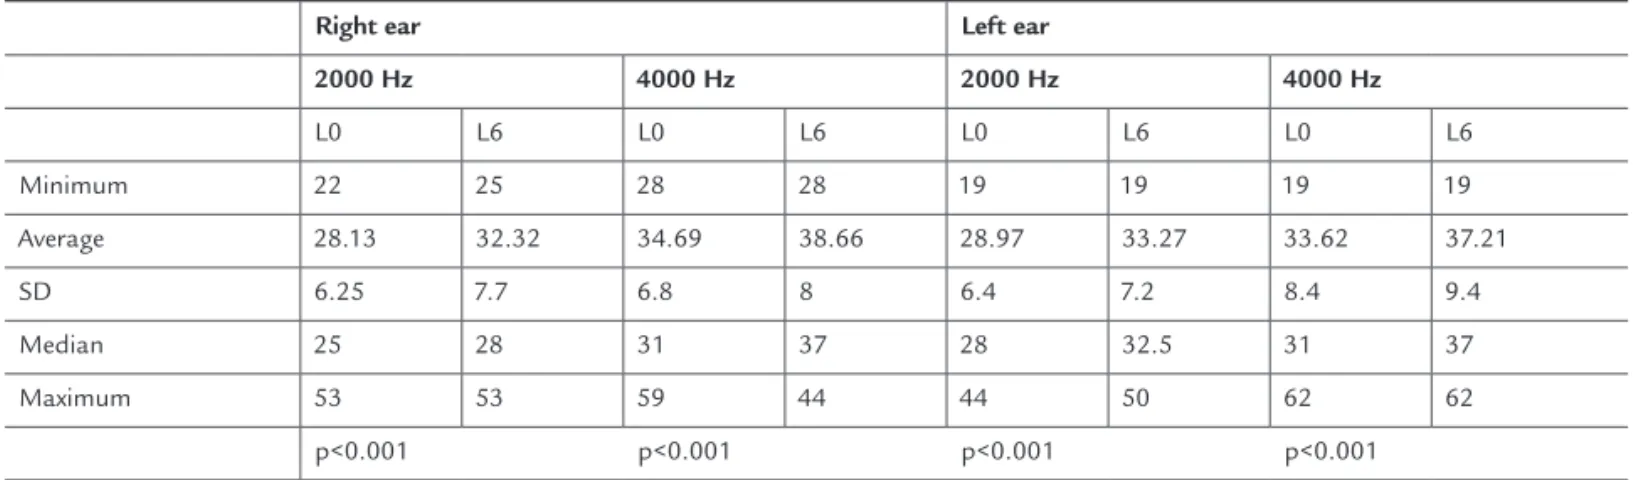 TABLE 2 Distribution of emergence thresholds in decibels obtained in the 2 parameters (Lim0 and Lim6) by ear and by  frequency 